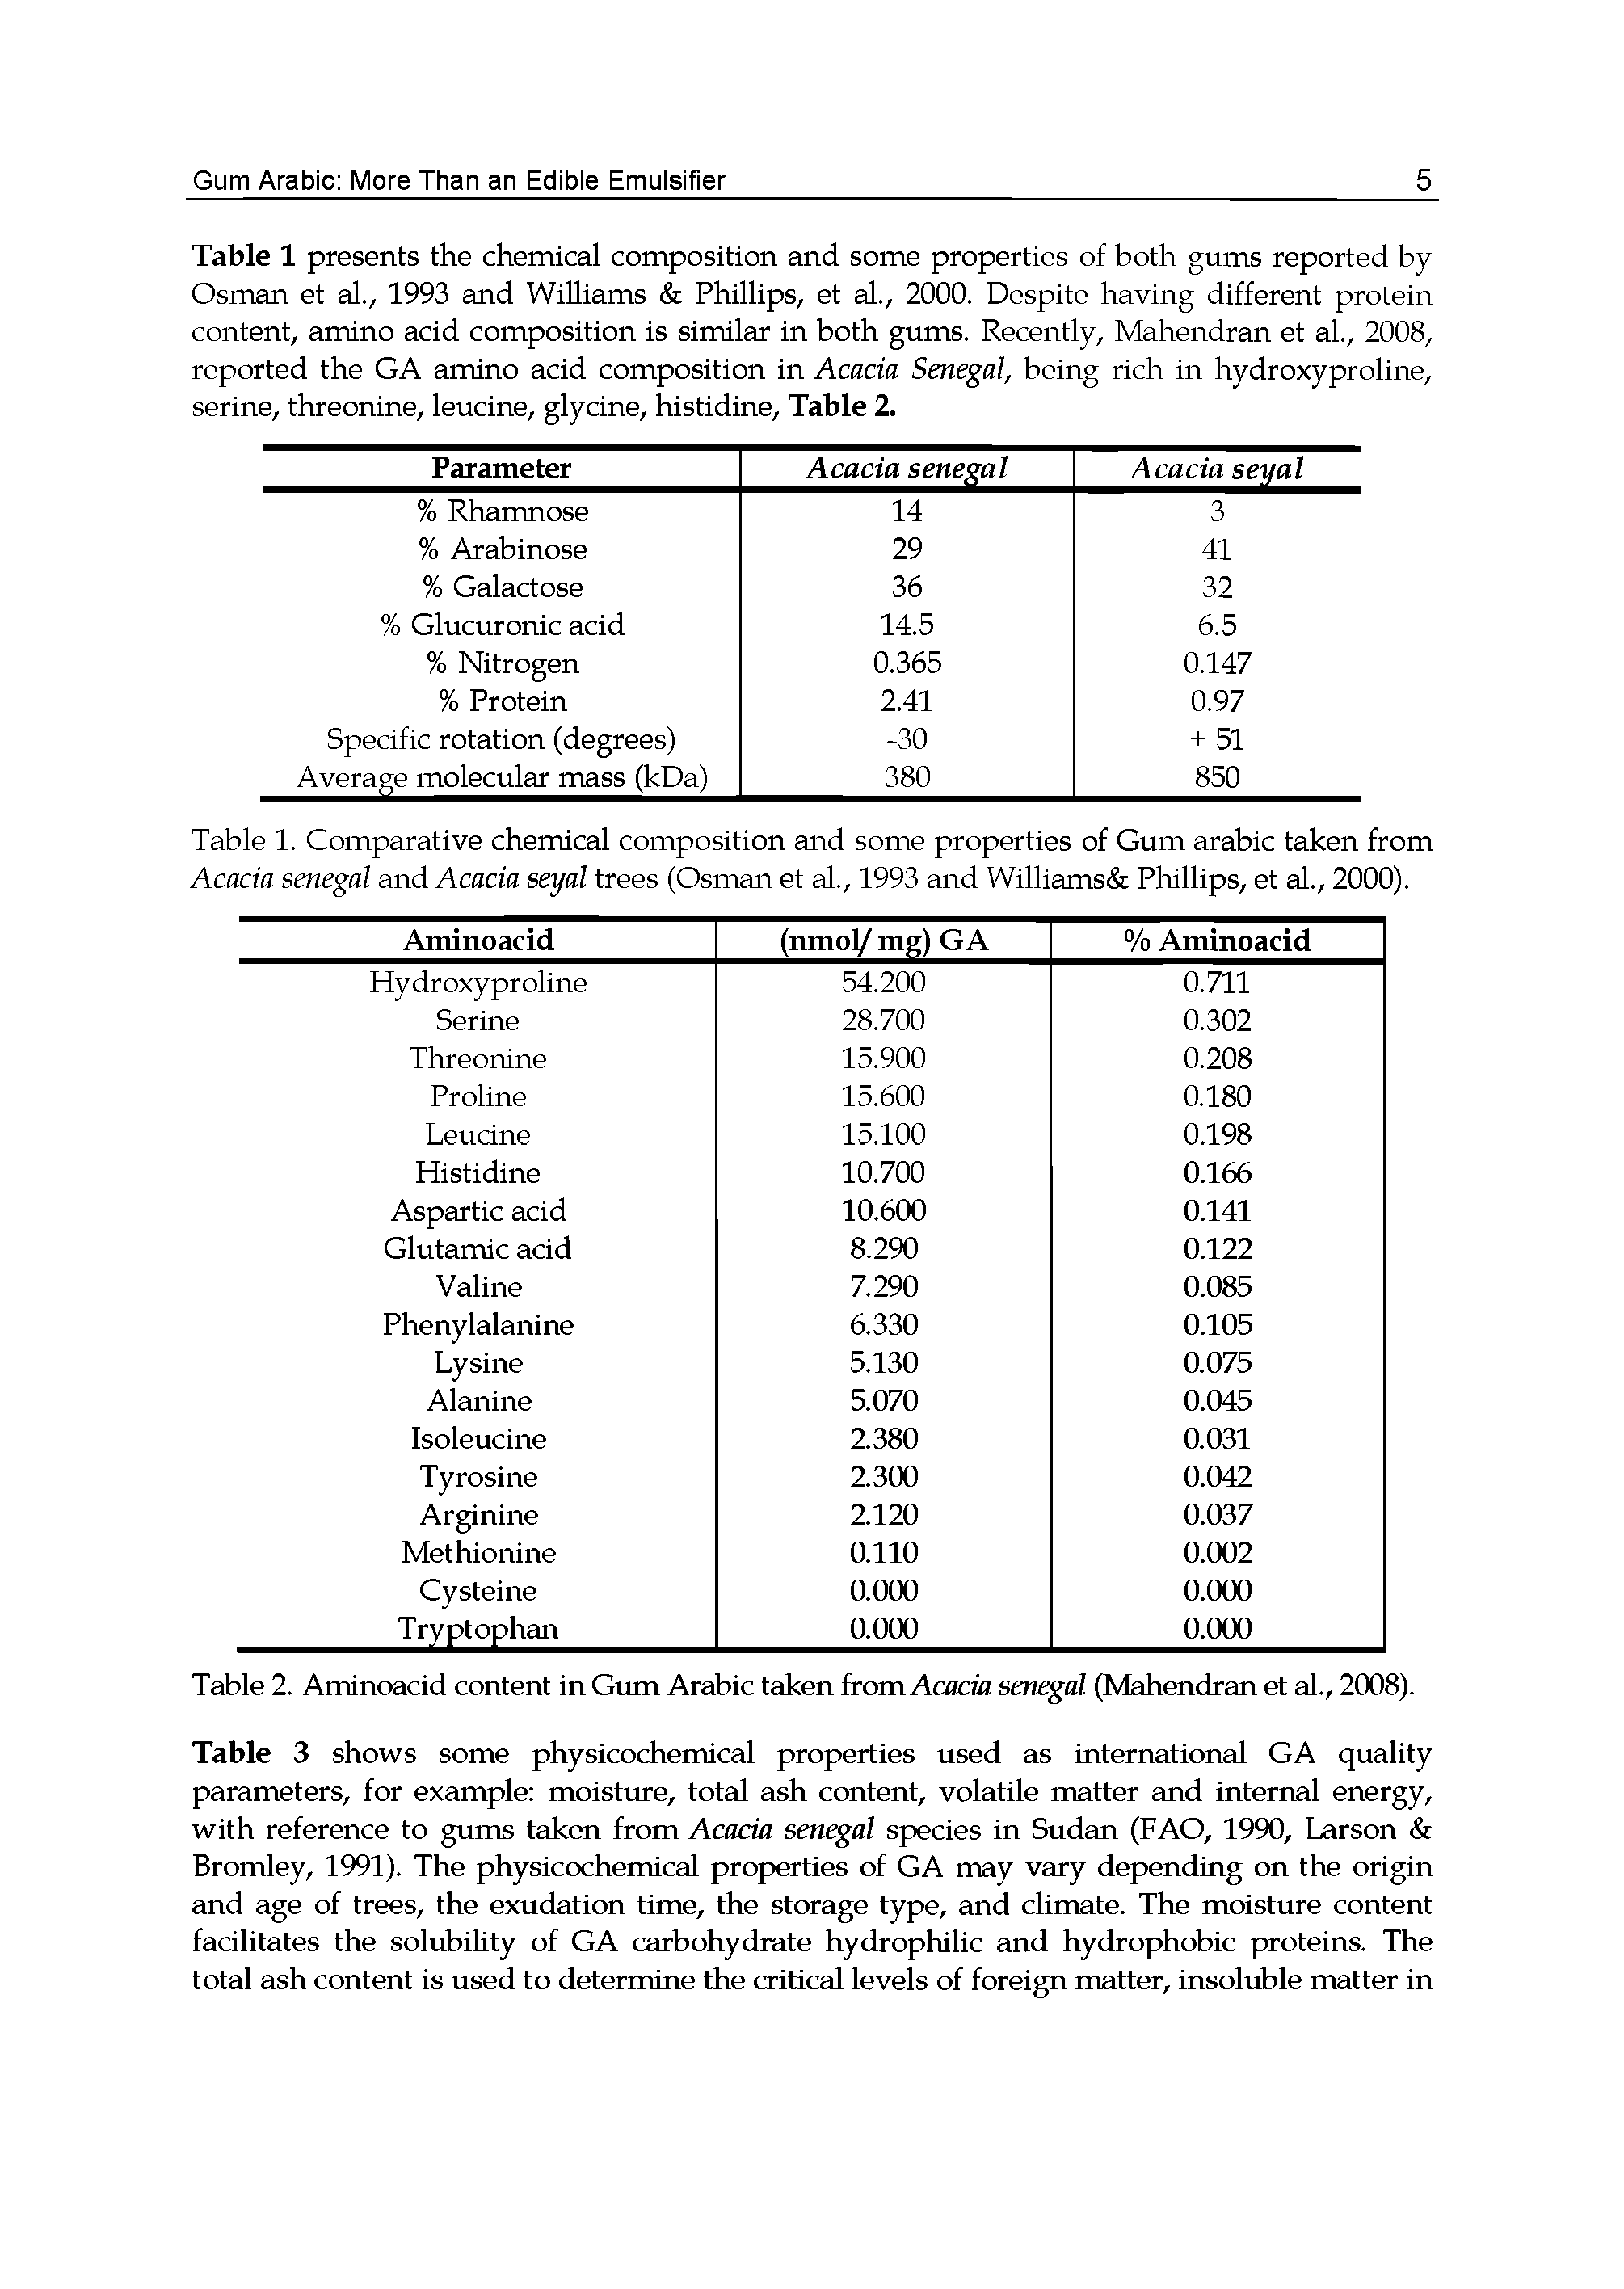 Table 1. Comparative chemical composition and some properties of Gum arabic taken from Acacia Senegal and Acacia seyal trees (Osman et al., 1993 and Williams Phillips, et al., 2000).